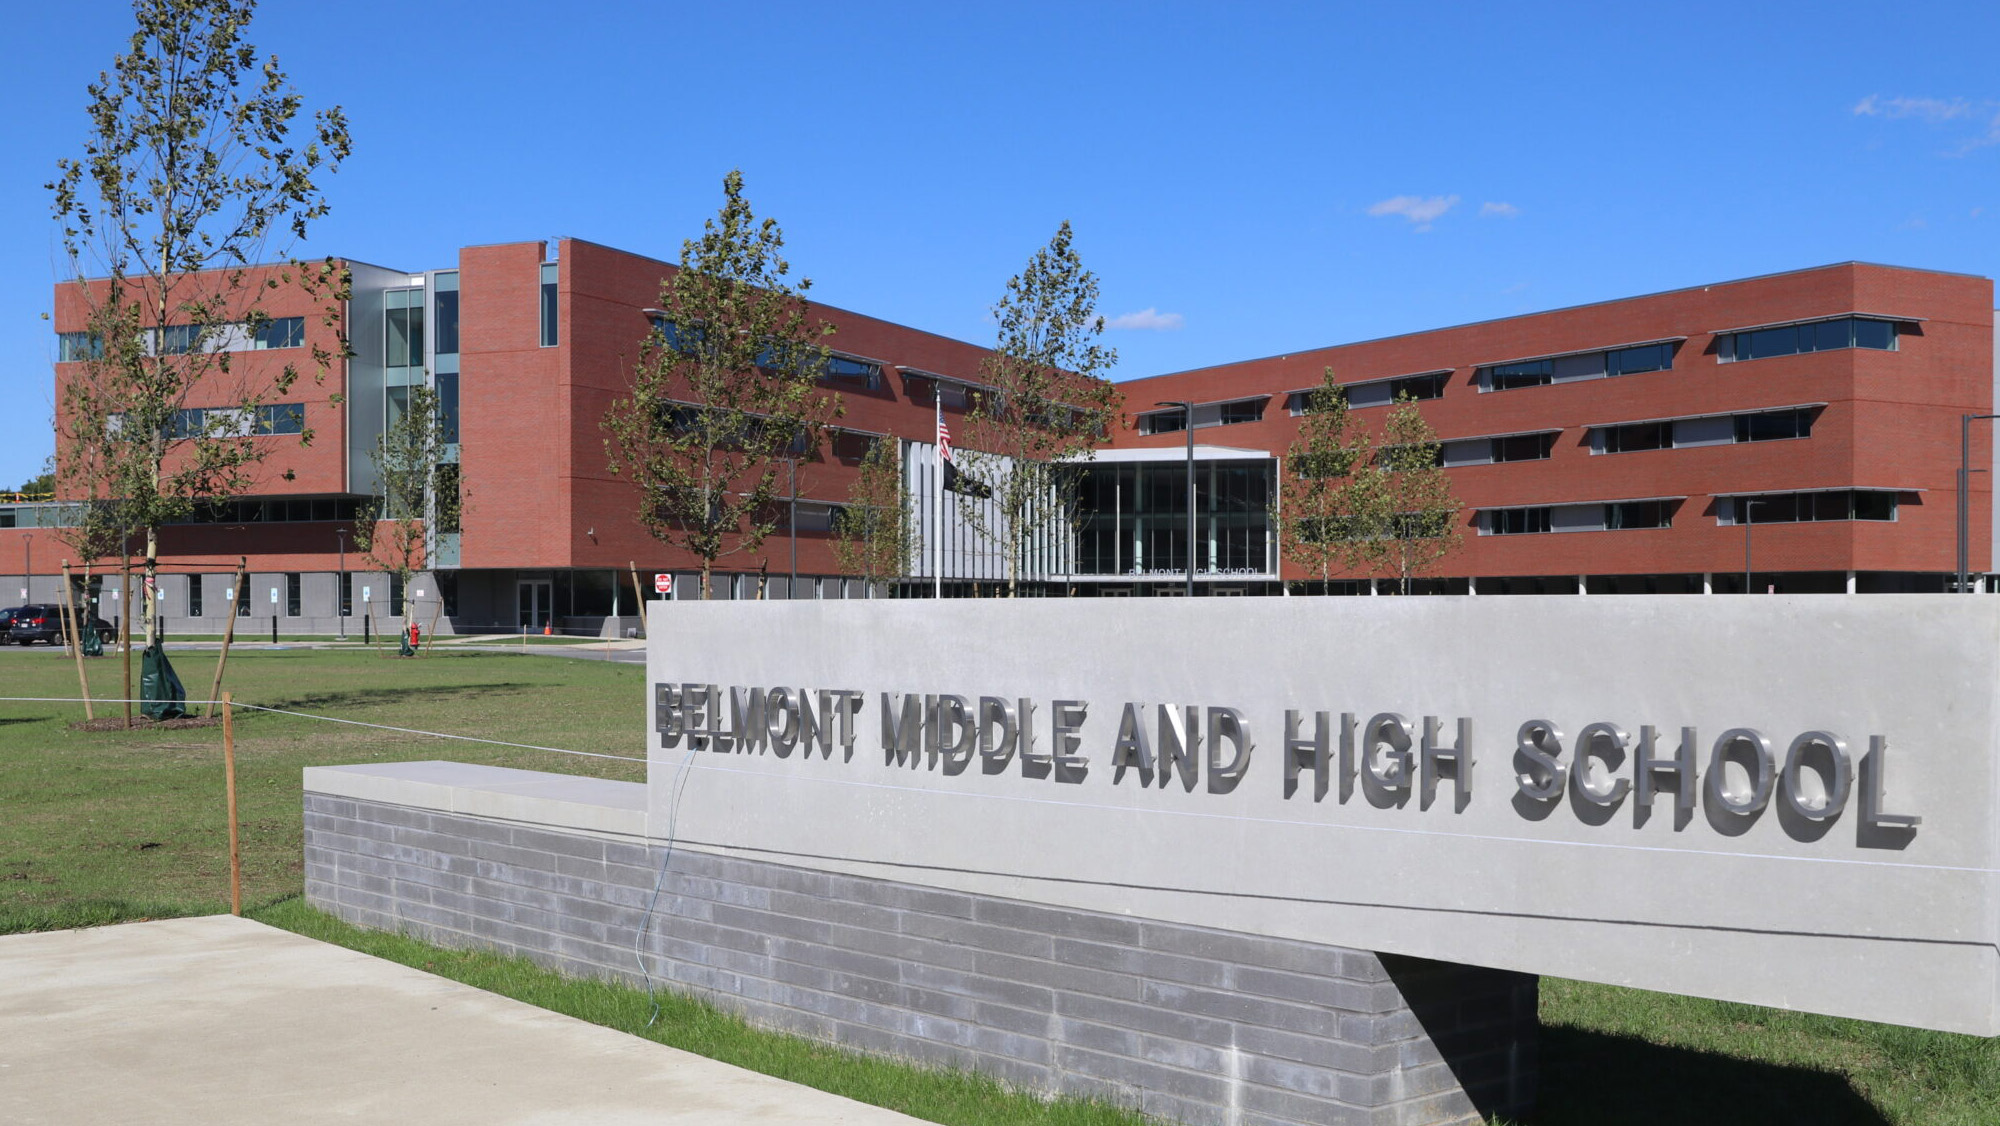 belmont middle and high school building from the outside